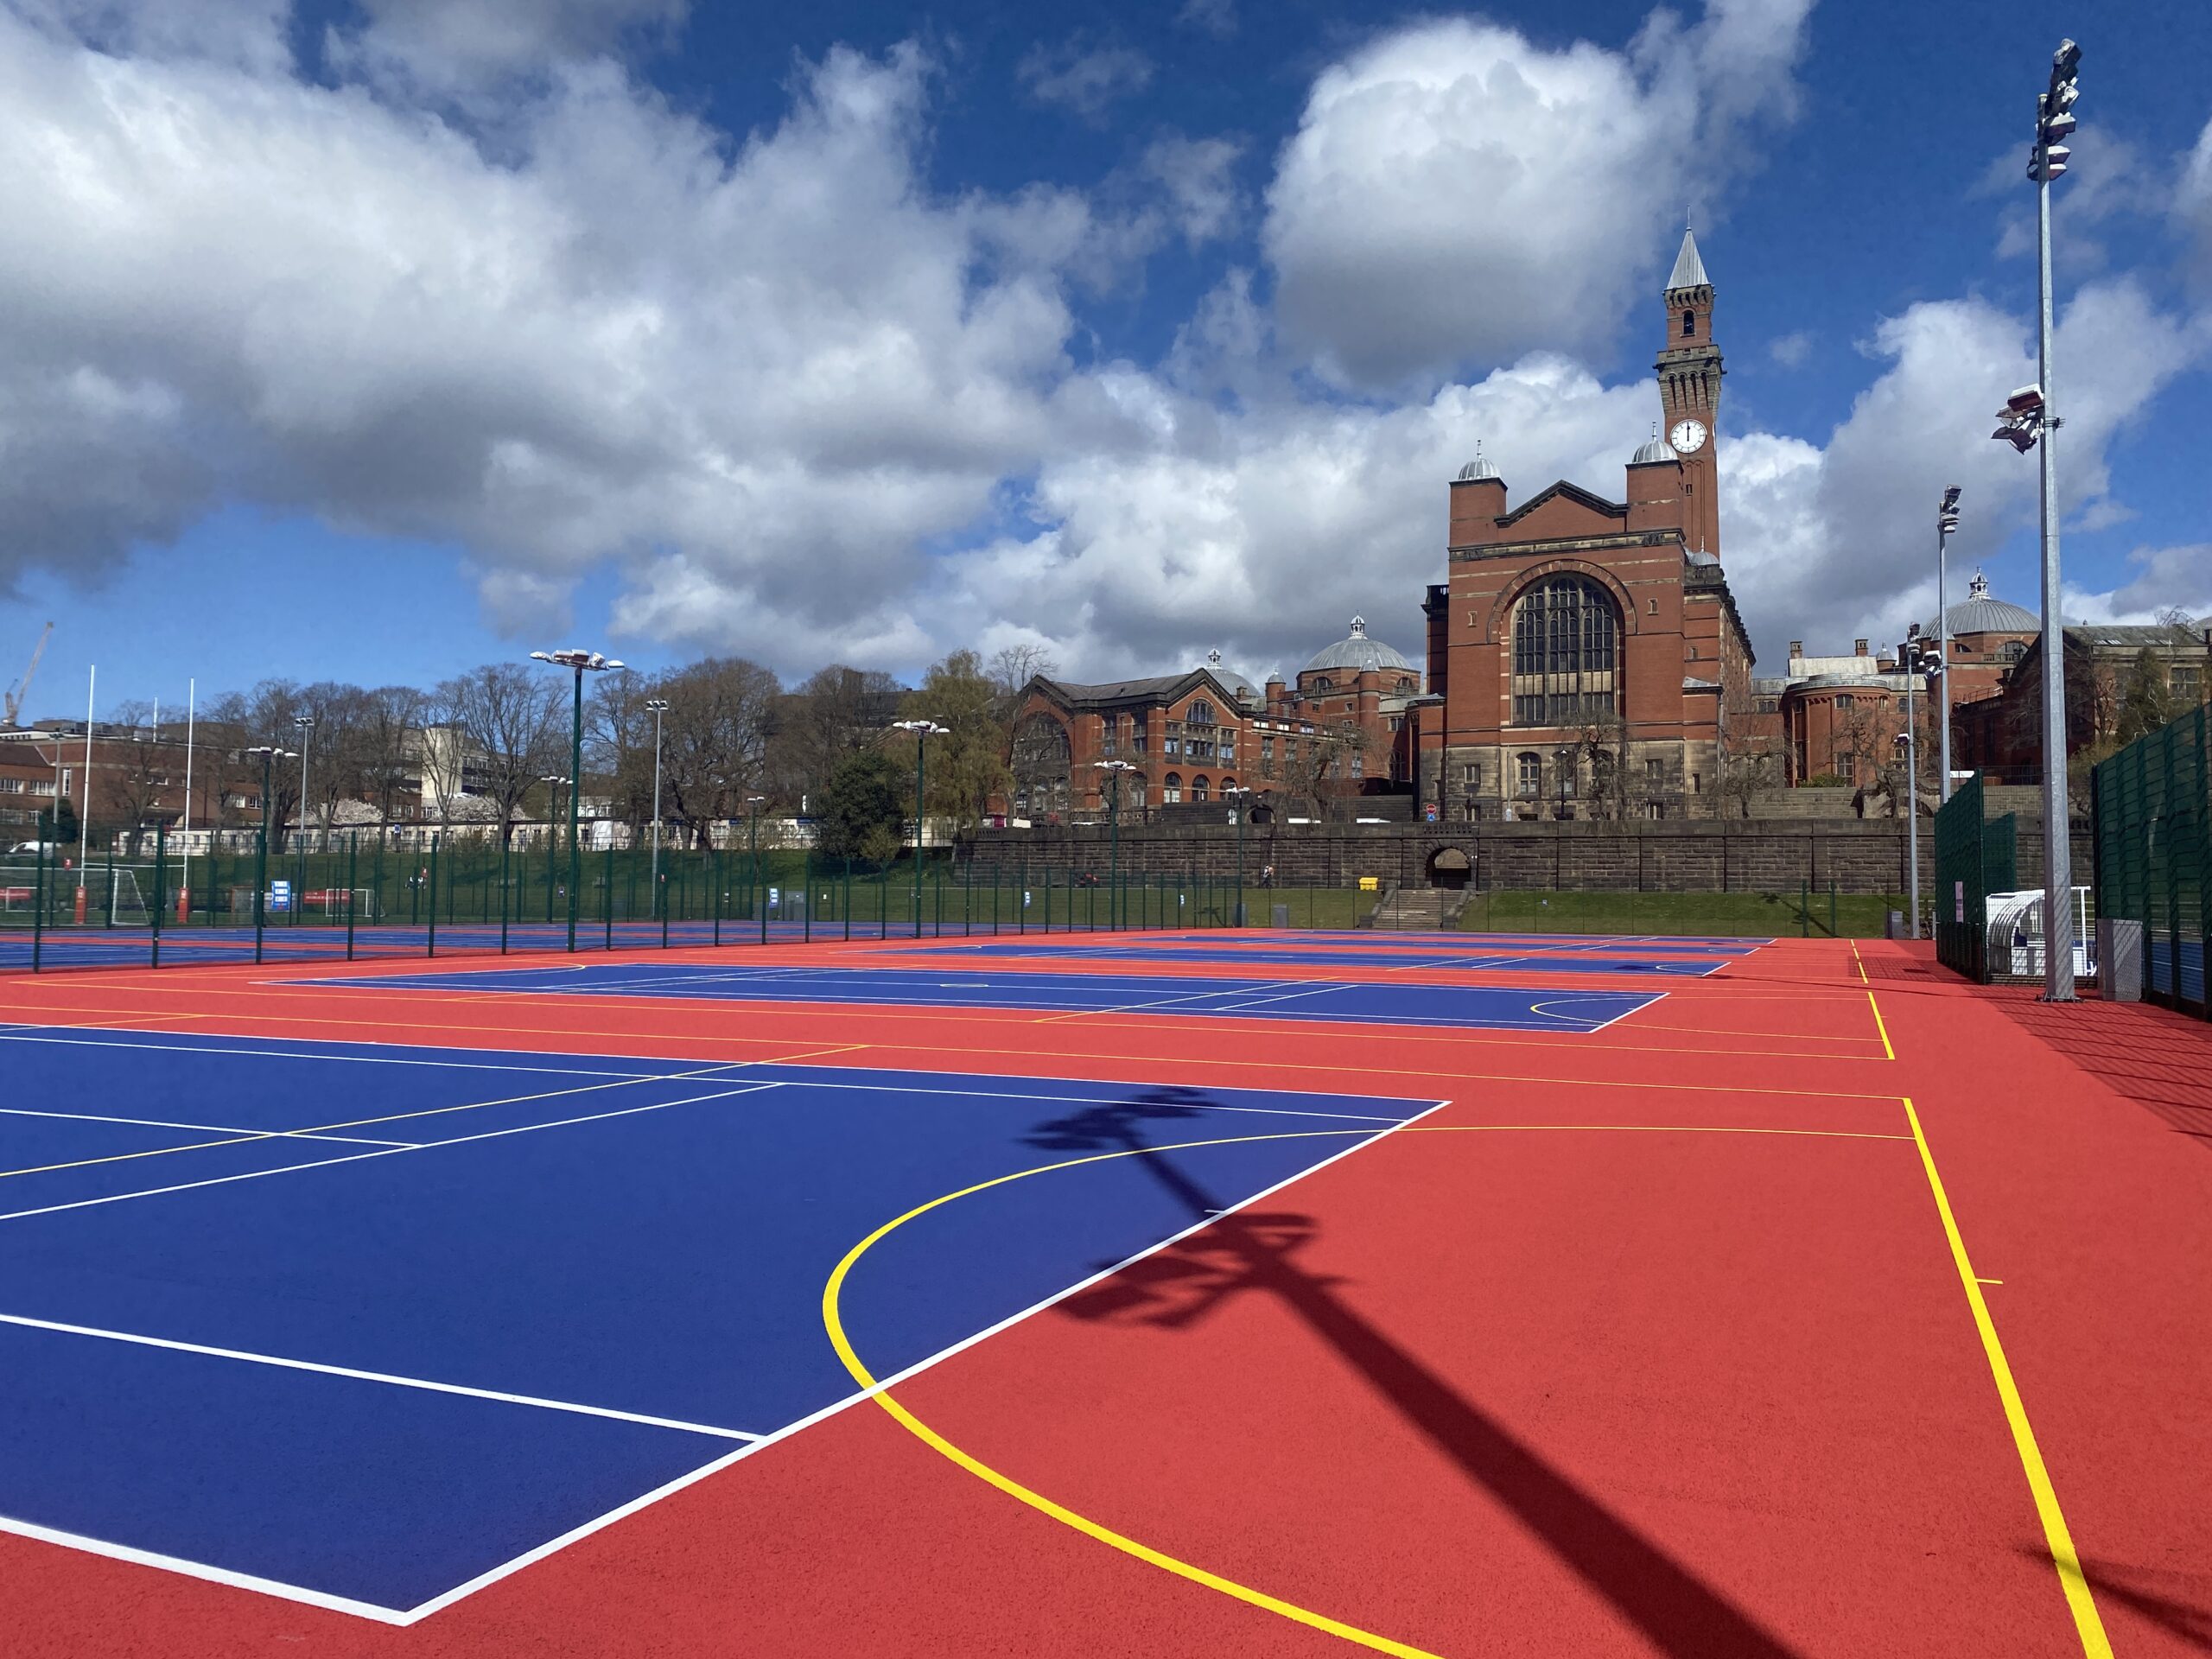 Sport & Fitness, Tennis Courts